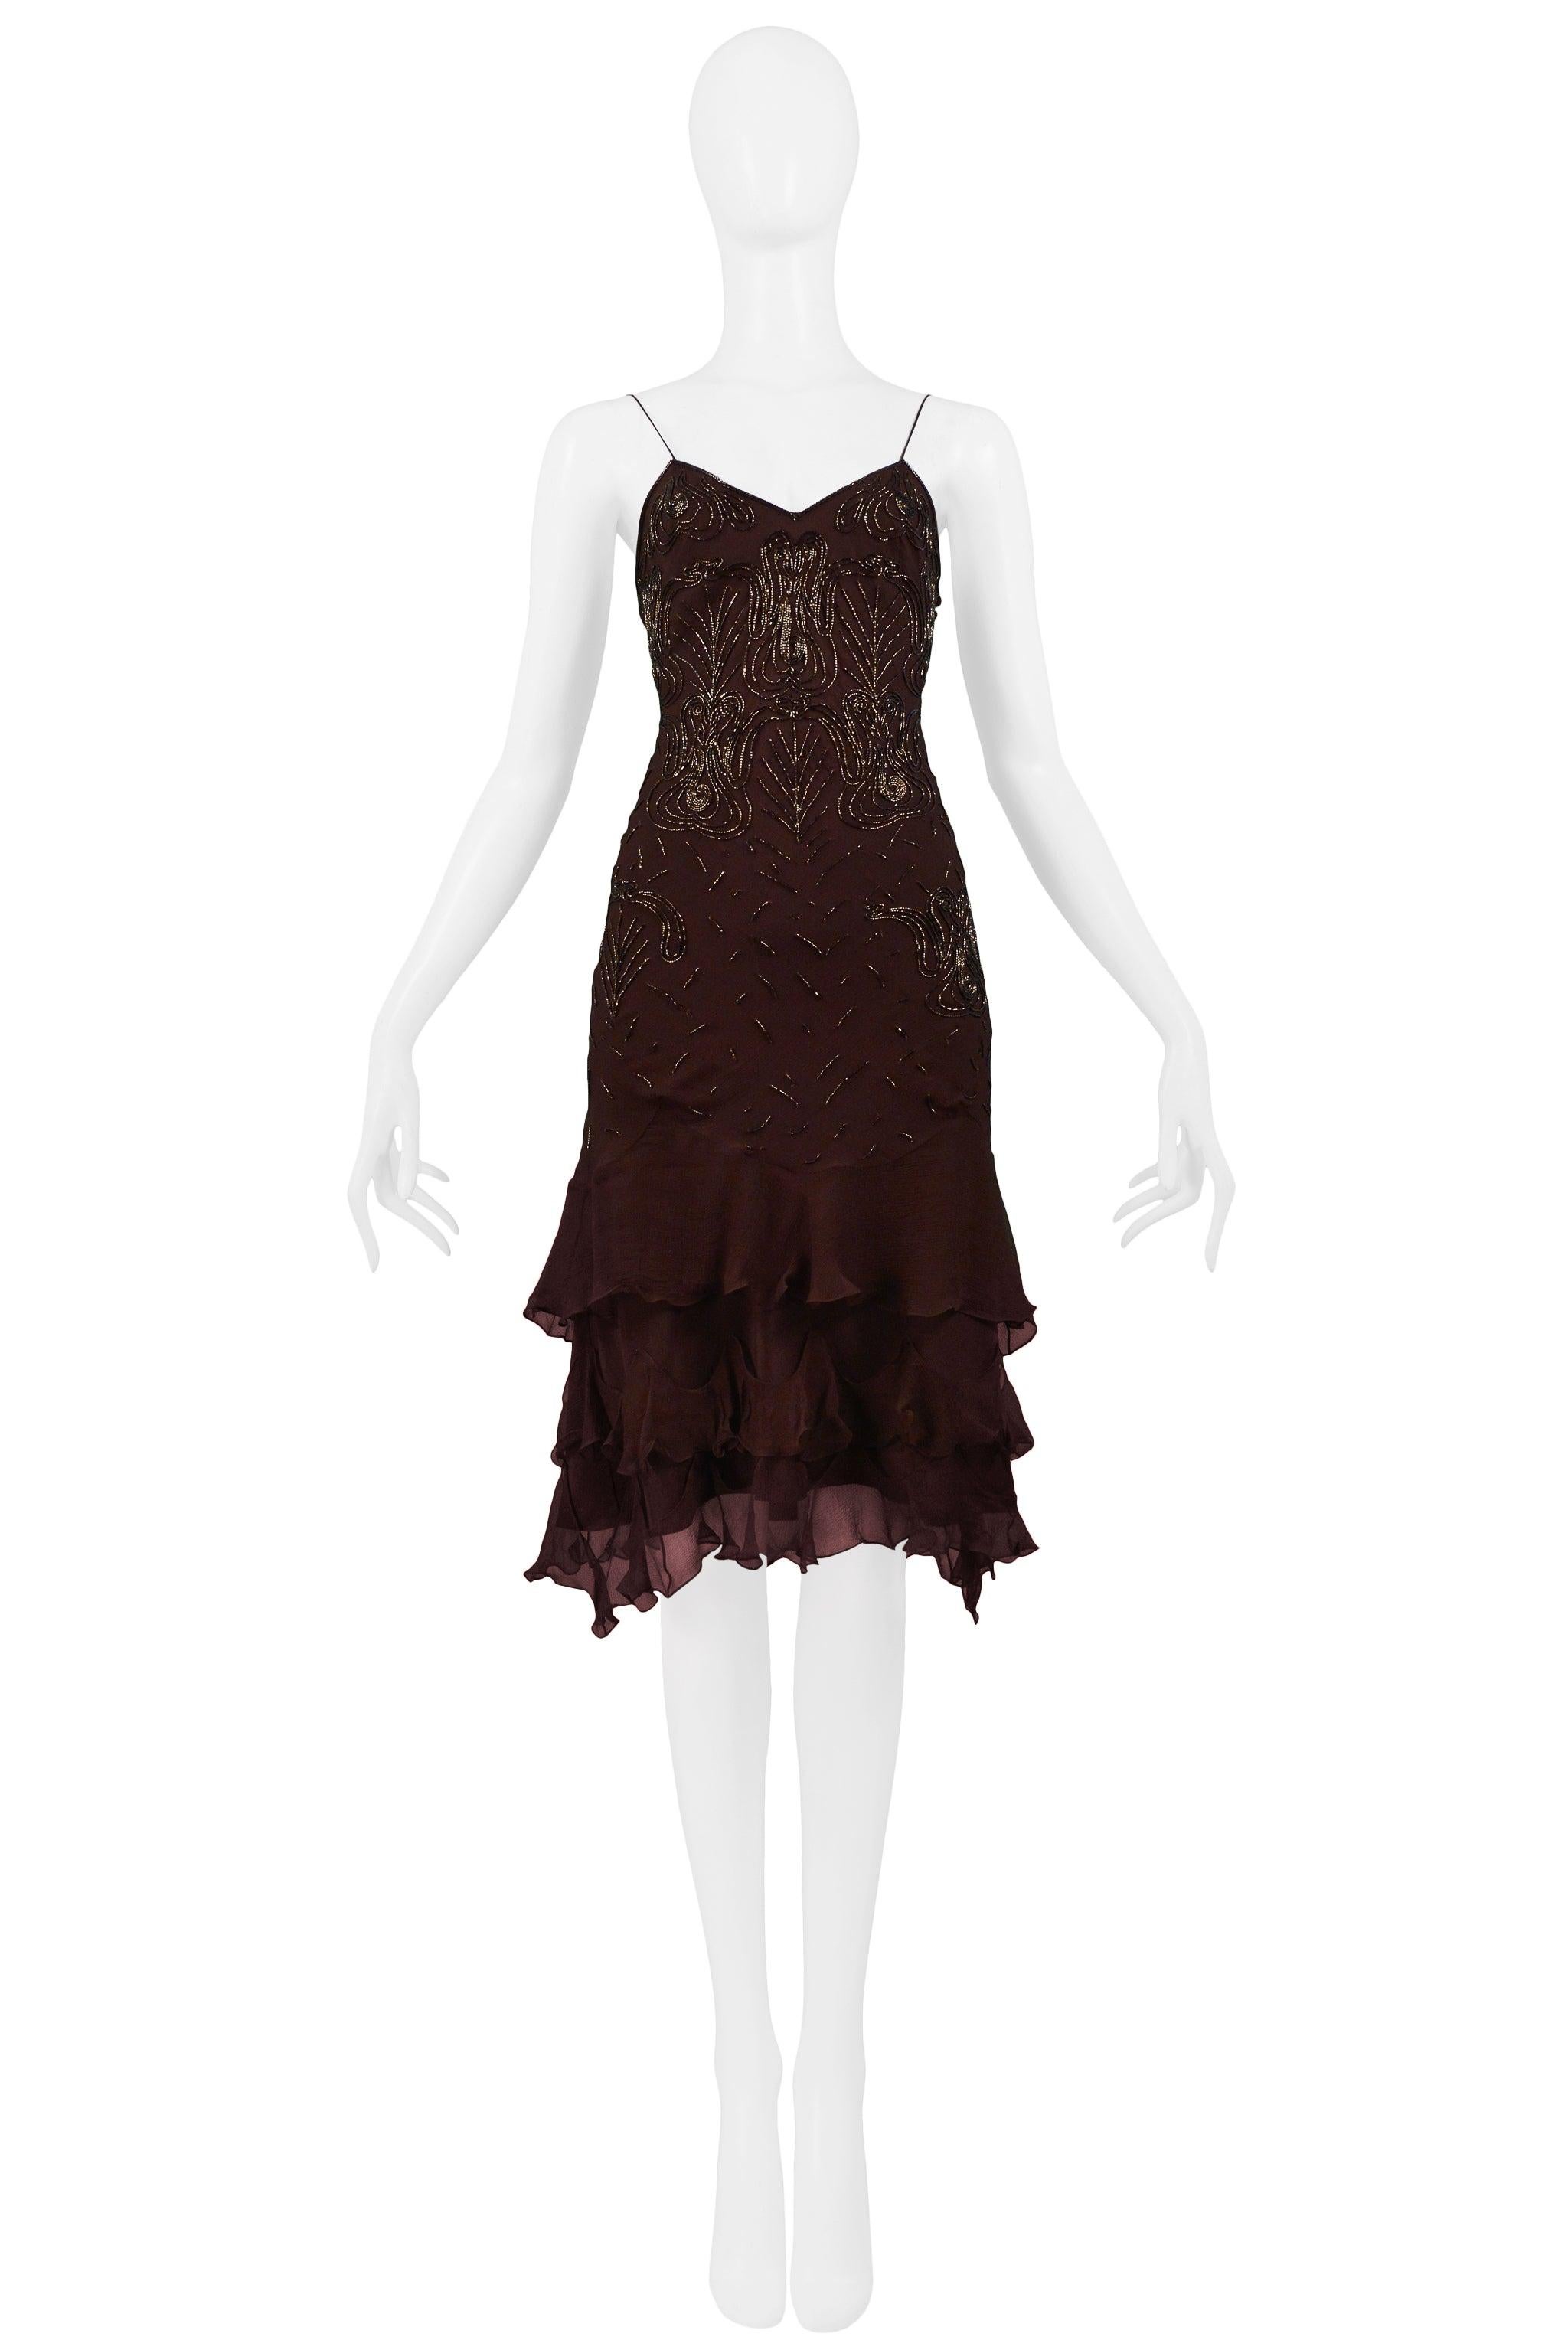 Resurrection is excited to offer a vintage Christian Dior by John Galliano brown silk dress featuring a sweetheart neckline, spaghetti straps, tiered ruffles at skirt, and swirled beading throughout. The dress fits like a classic slip dress.